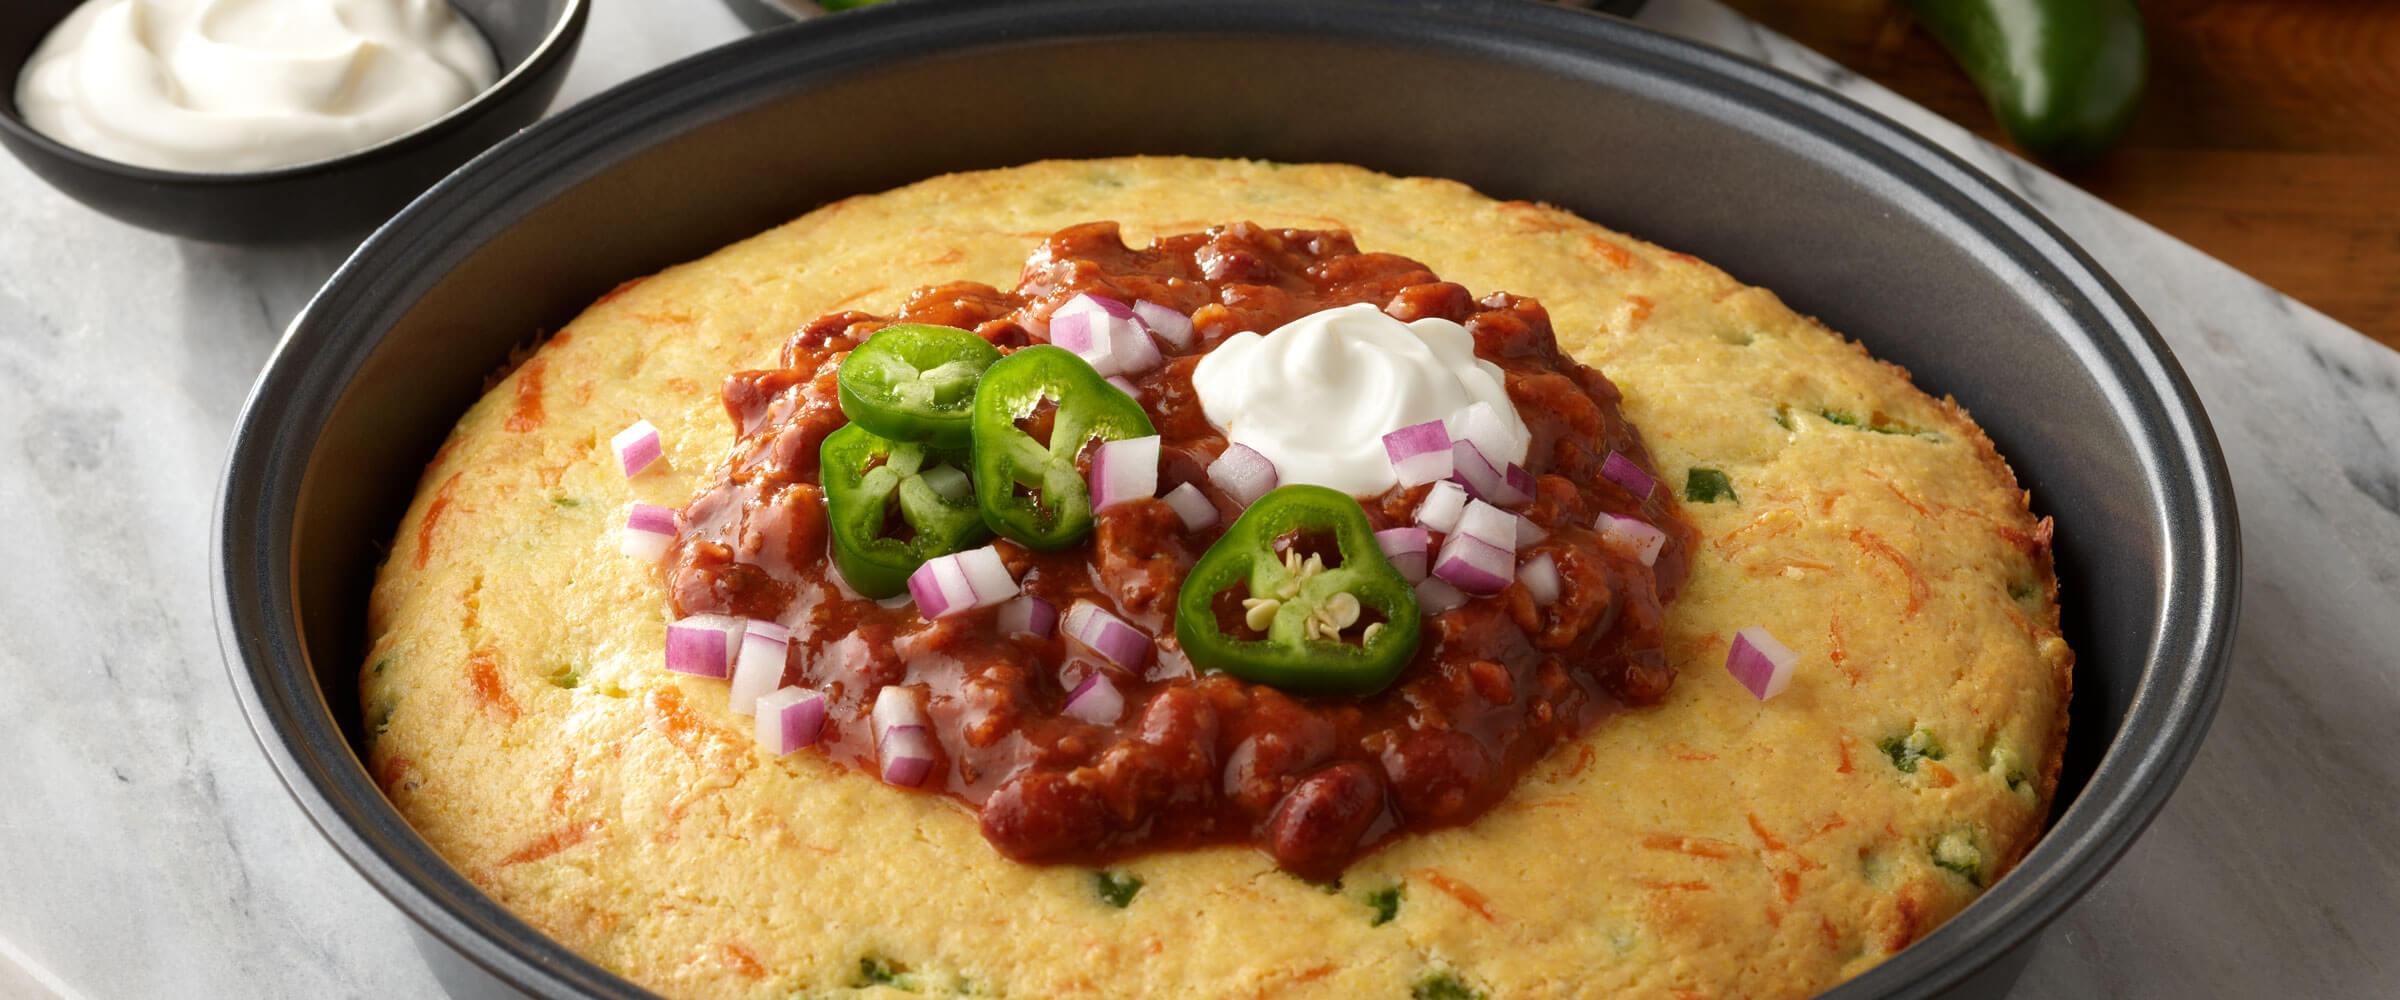 Chili Cornbread Bowl topped with jalapenos, red onions and sour cream in metal pan